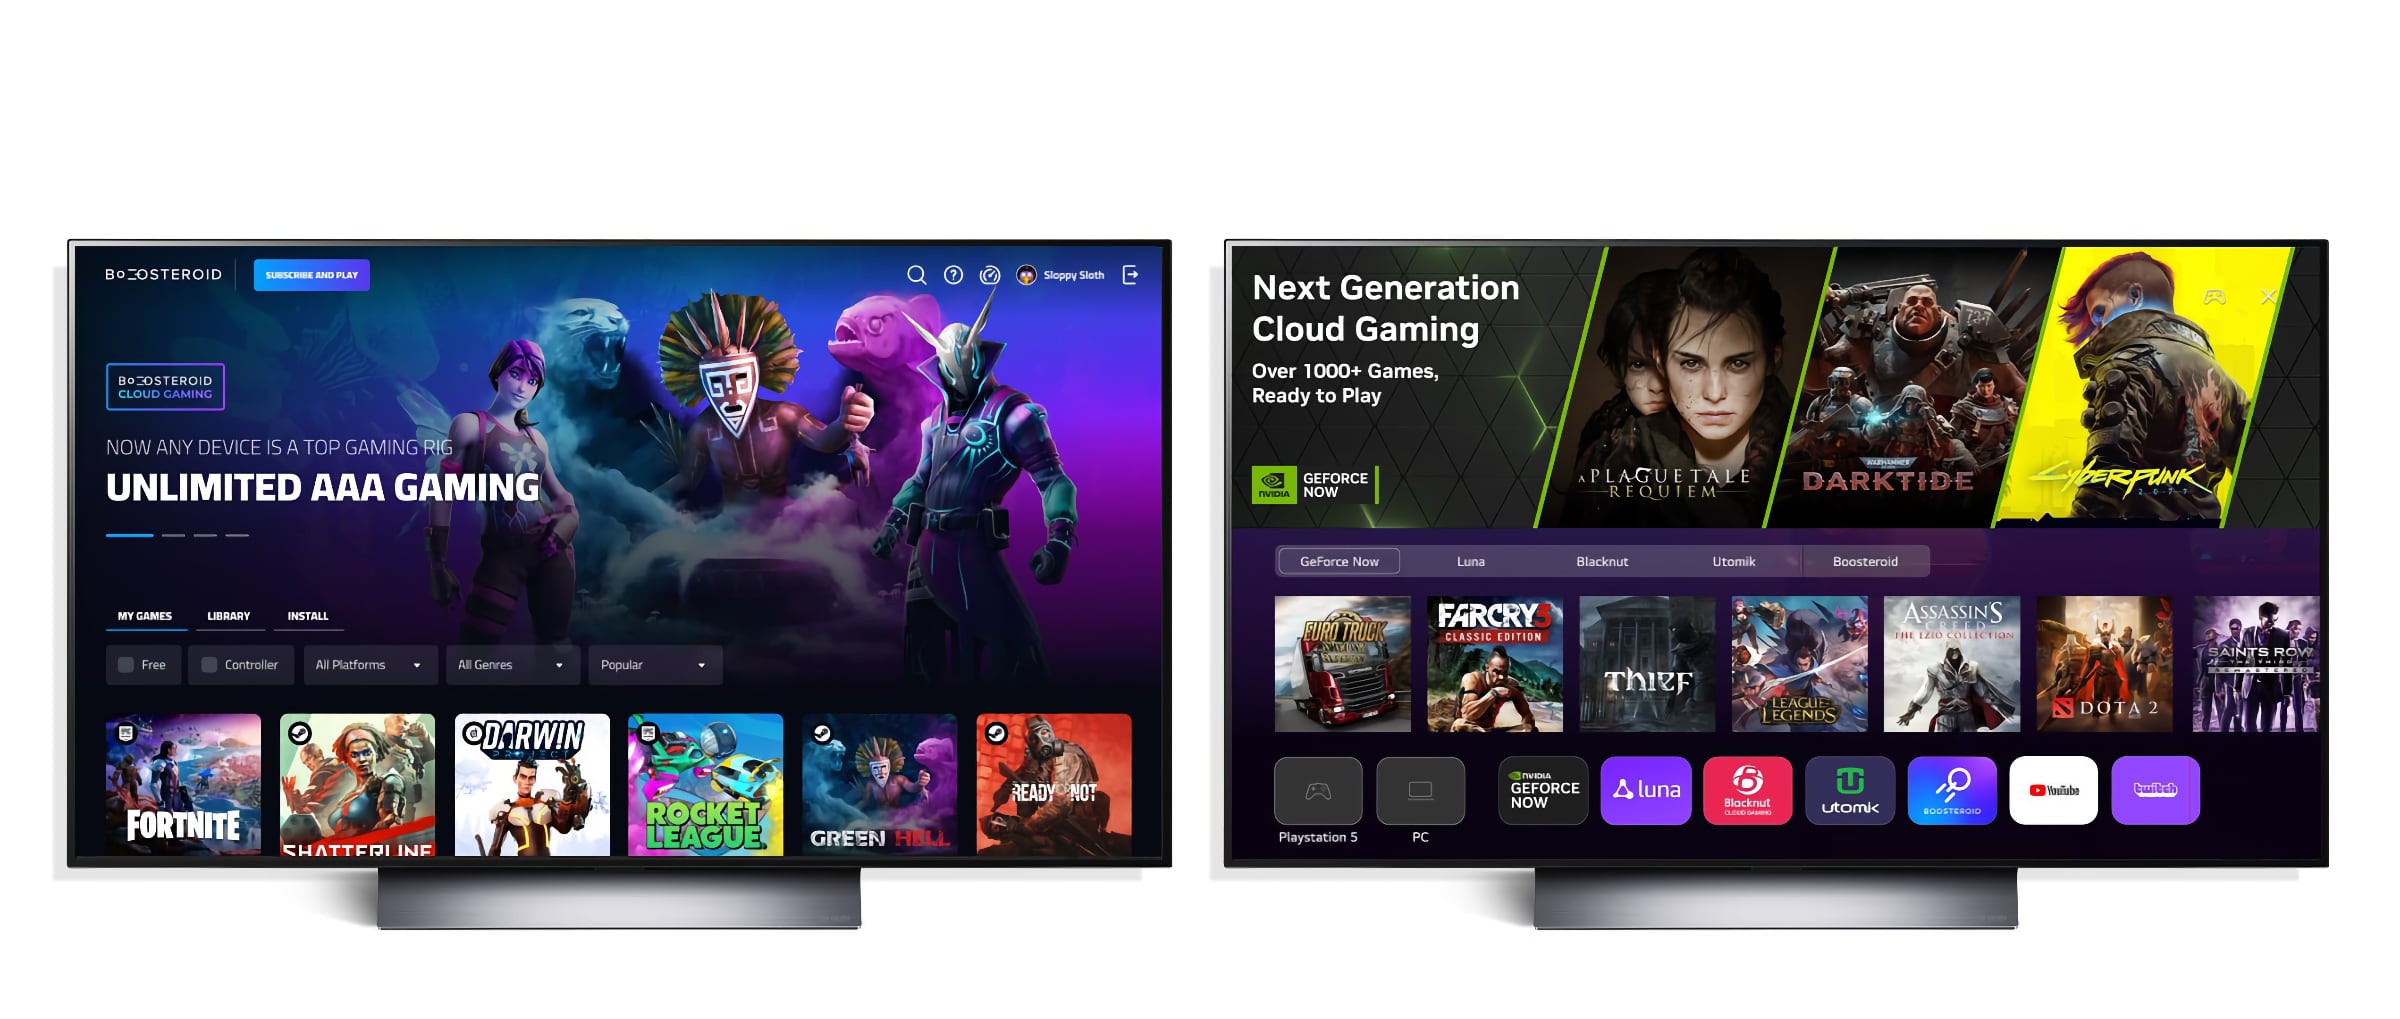 LG TVs Supported & 7 NEW Games  BOOSTEROID News Update 